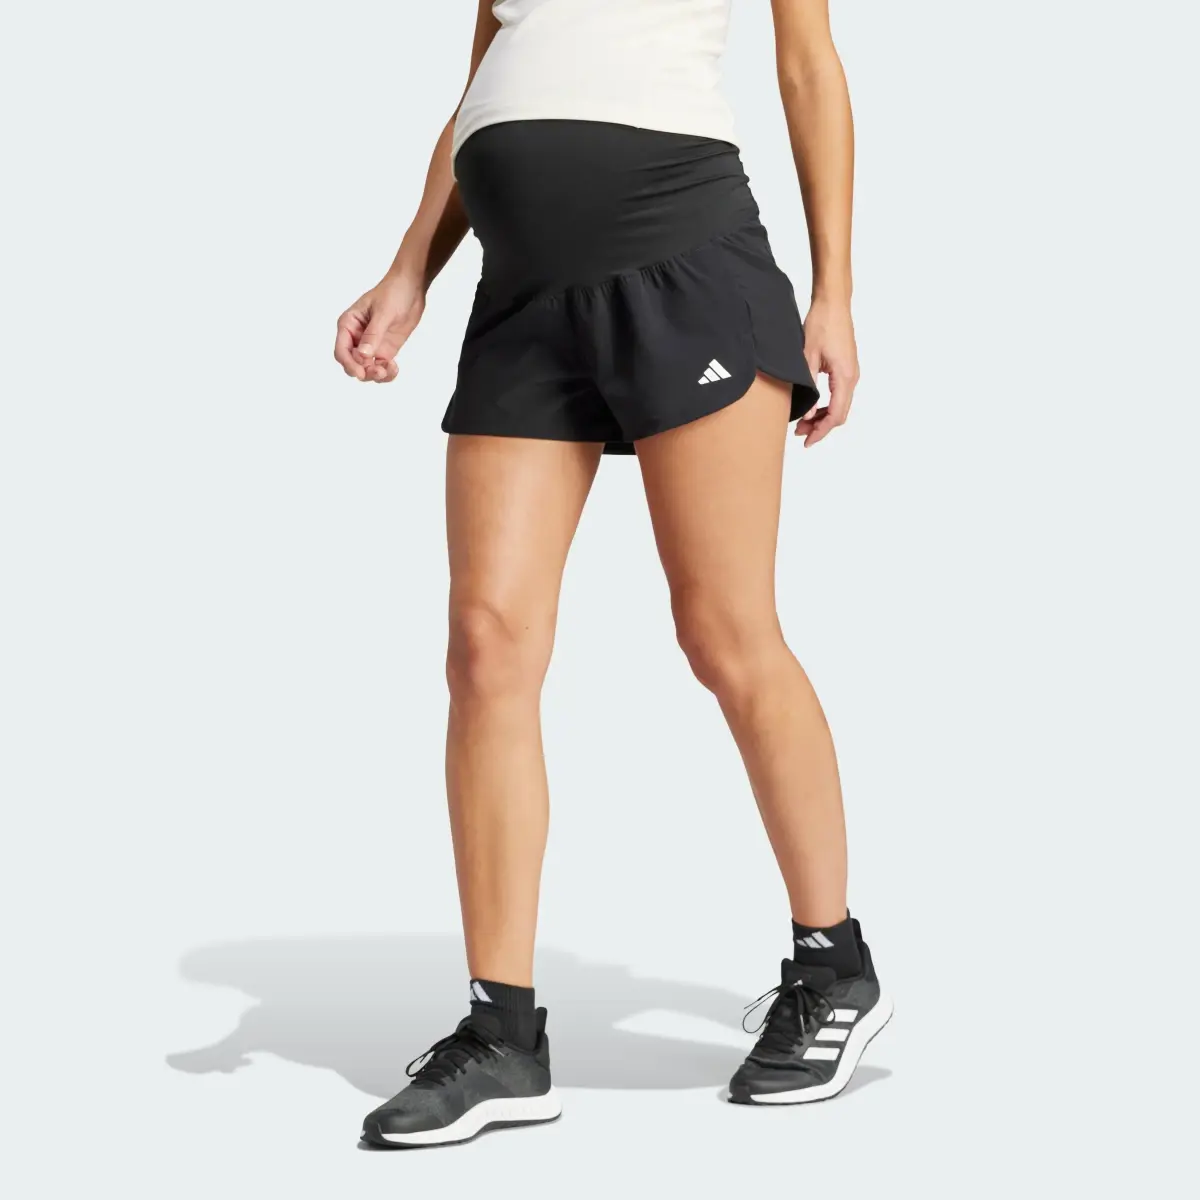 Adidas Pacer Woven Stretch Training Maternity Şort. 2